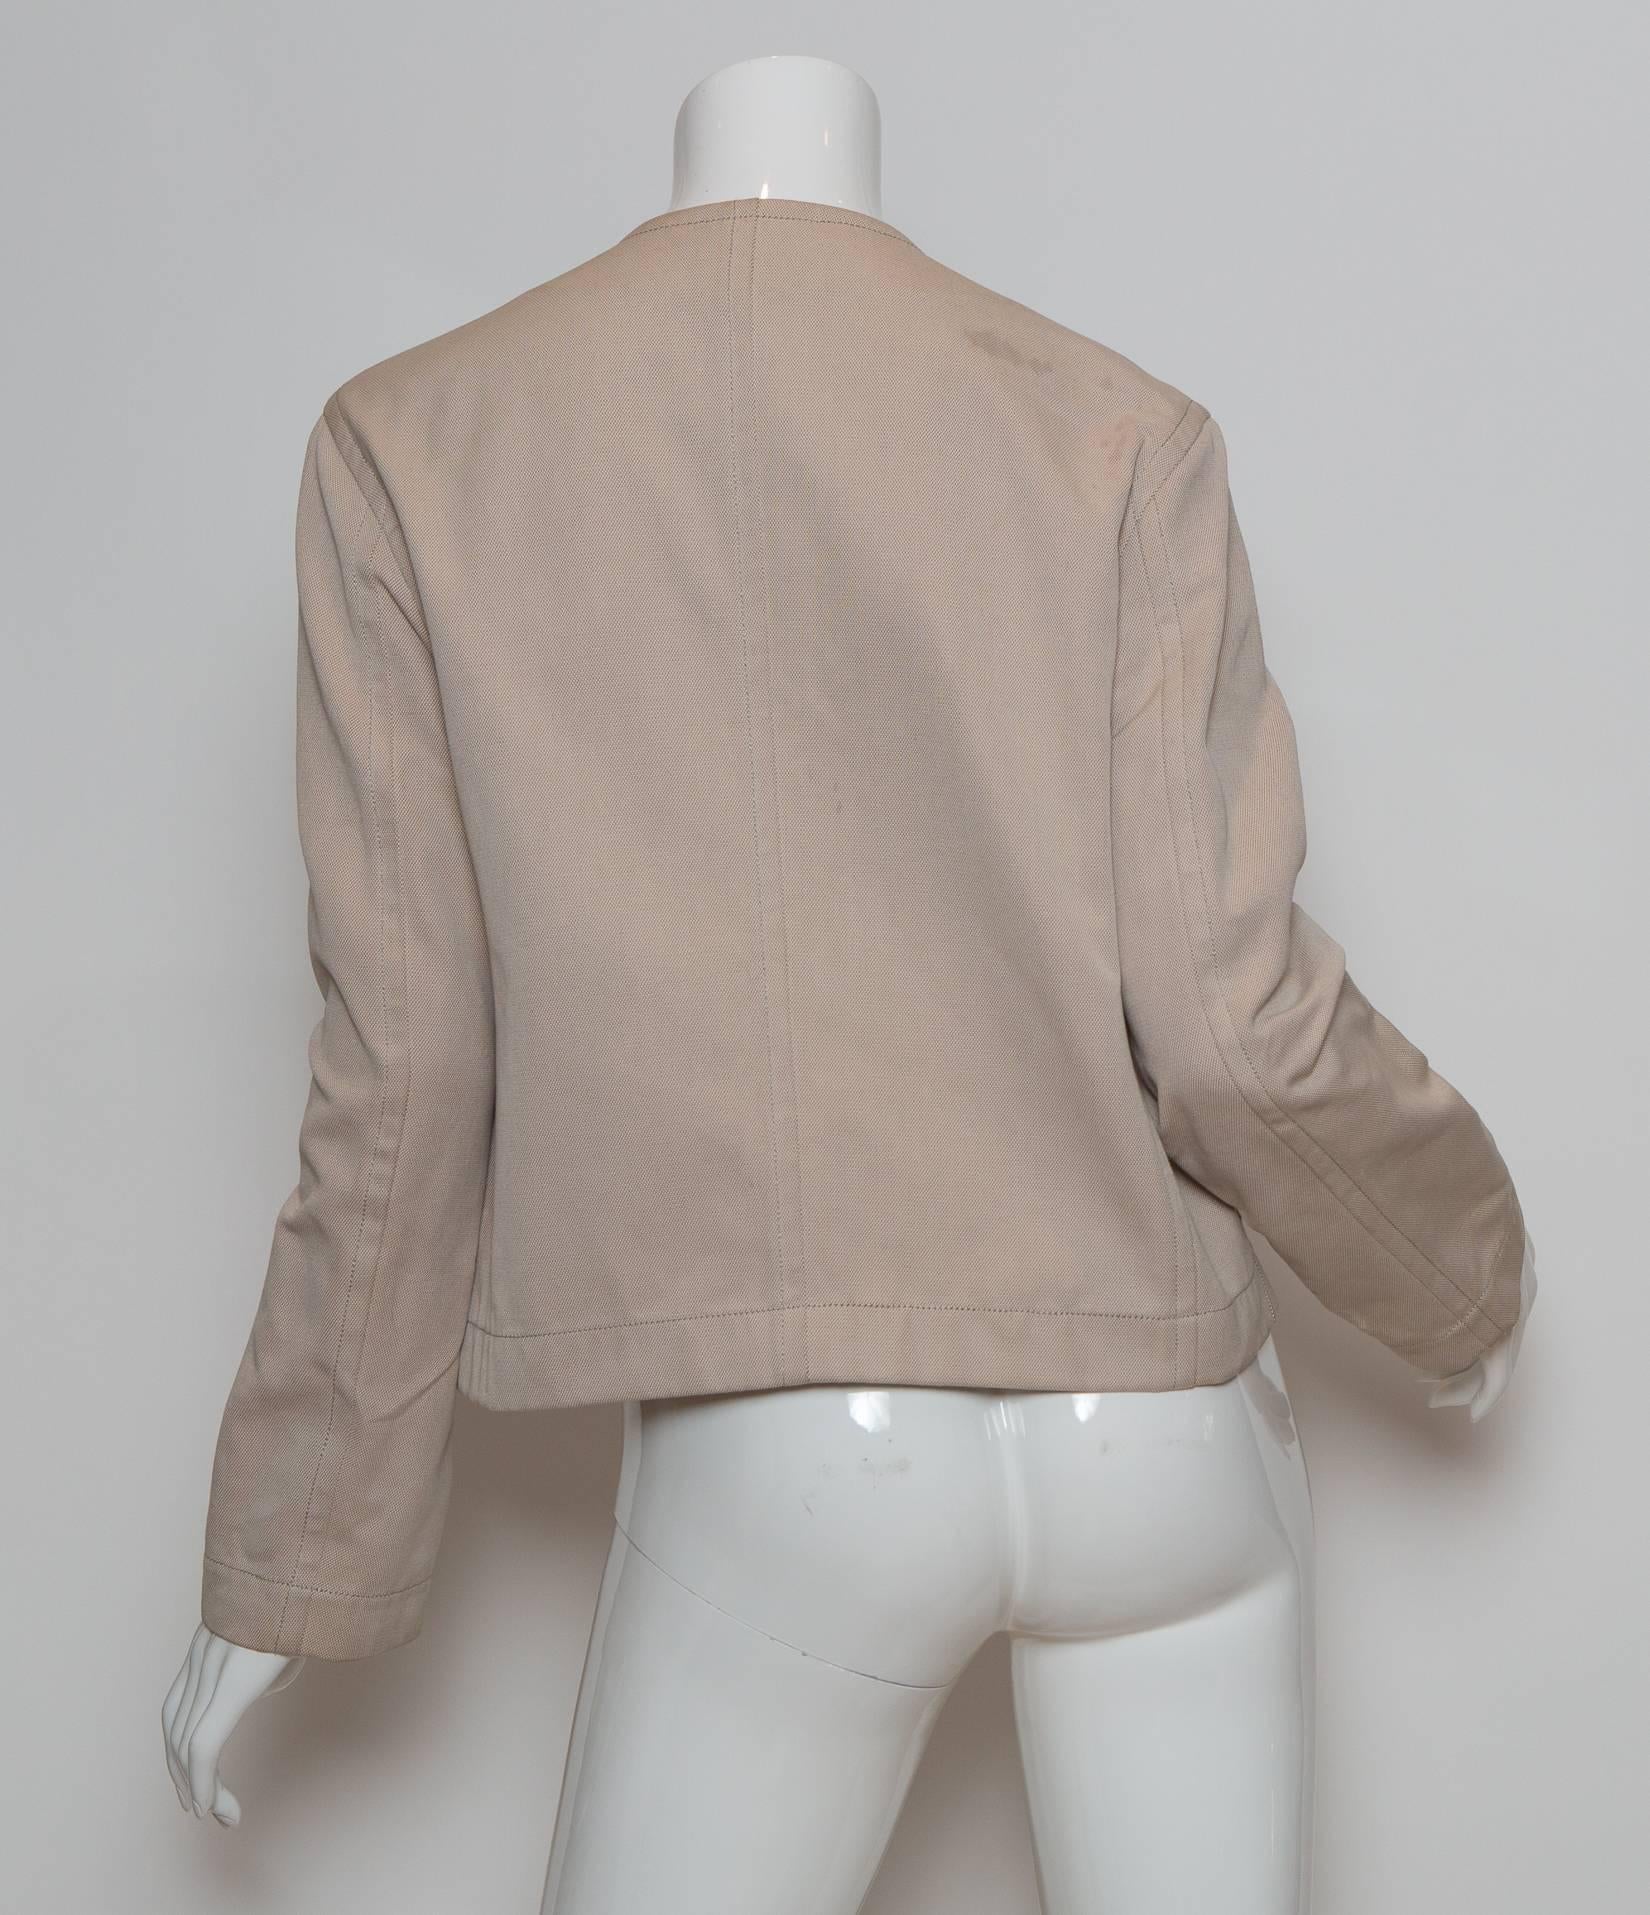 Hermes tan cotton jacket with silver toggles, and lamb skin detail.